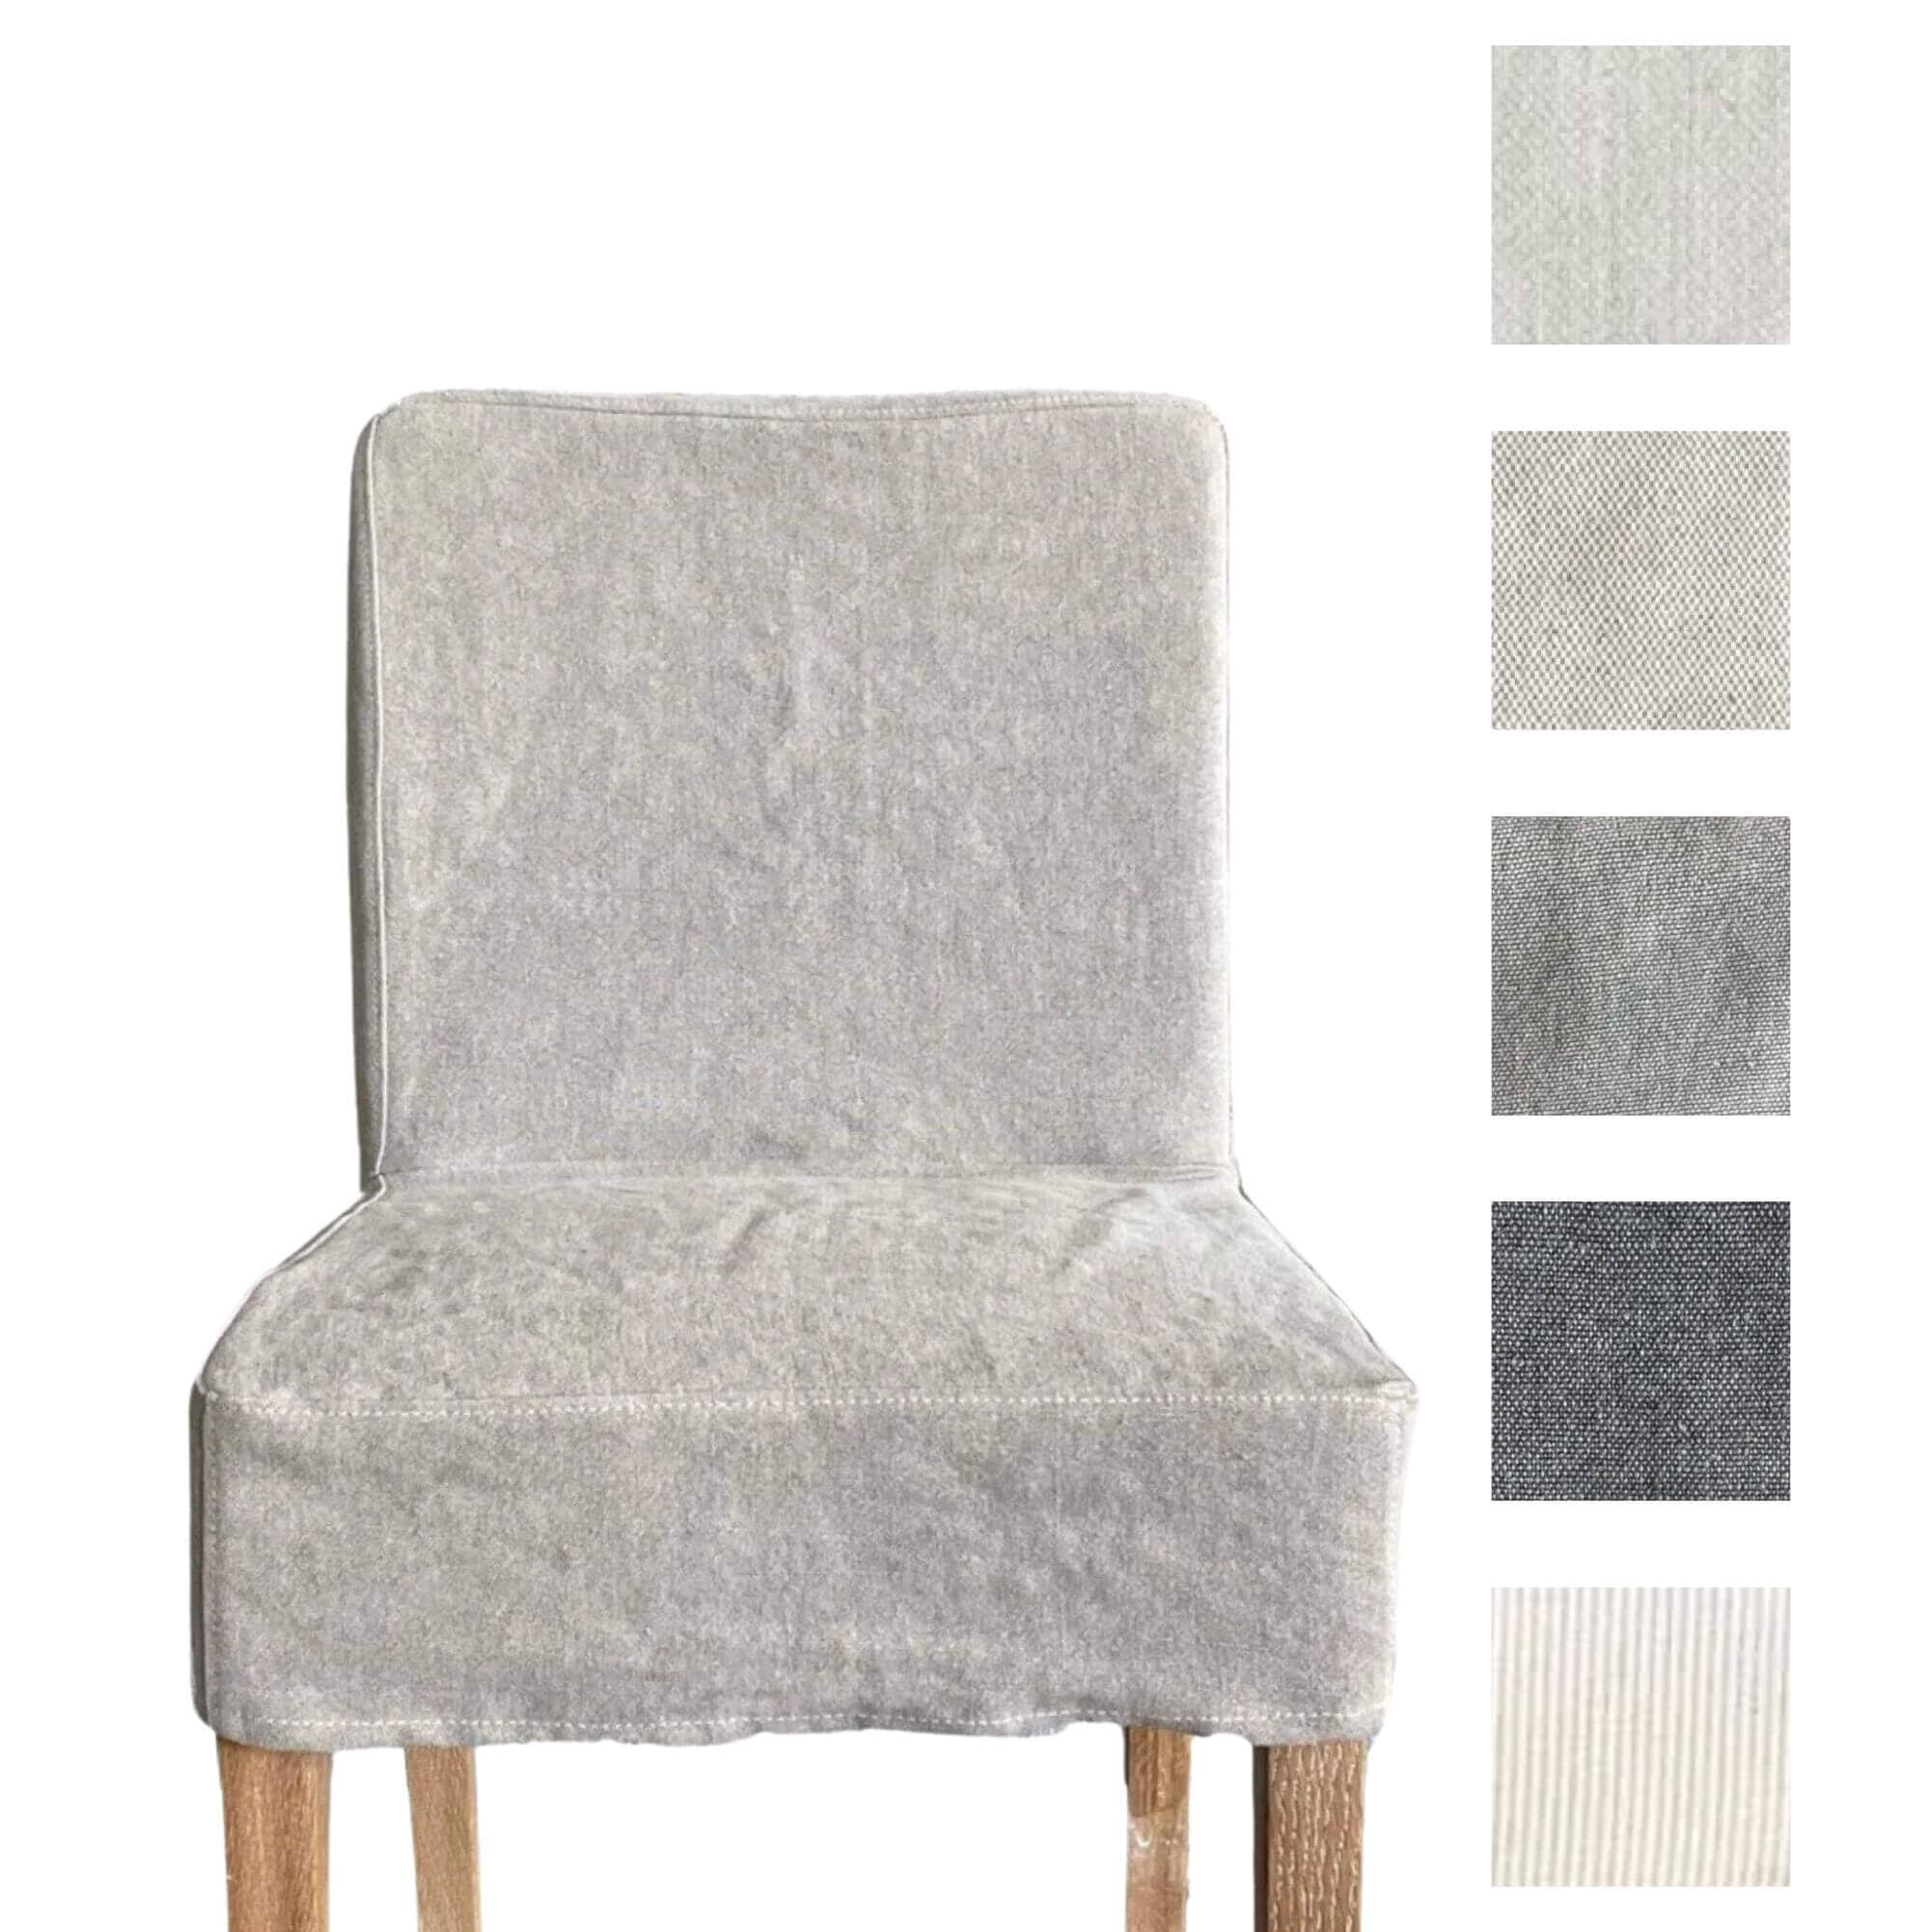 Collaroy Low Back Chair Cover Dining Furniture Beachwood Designs Shale Linen 